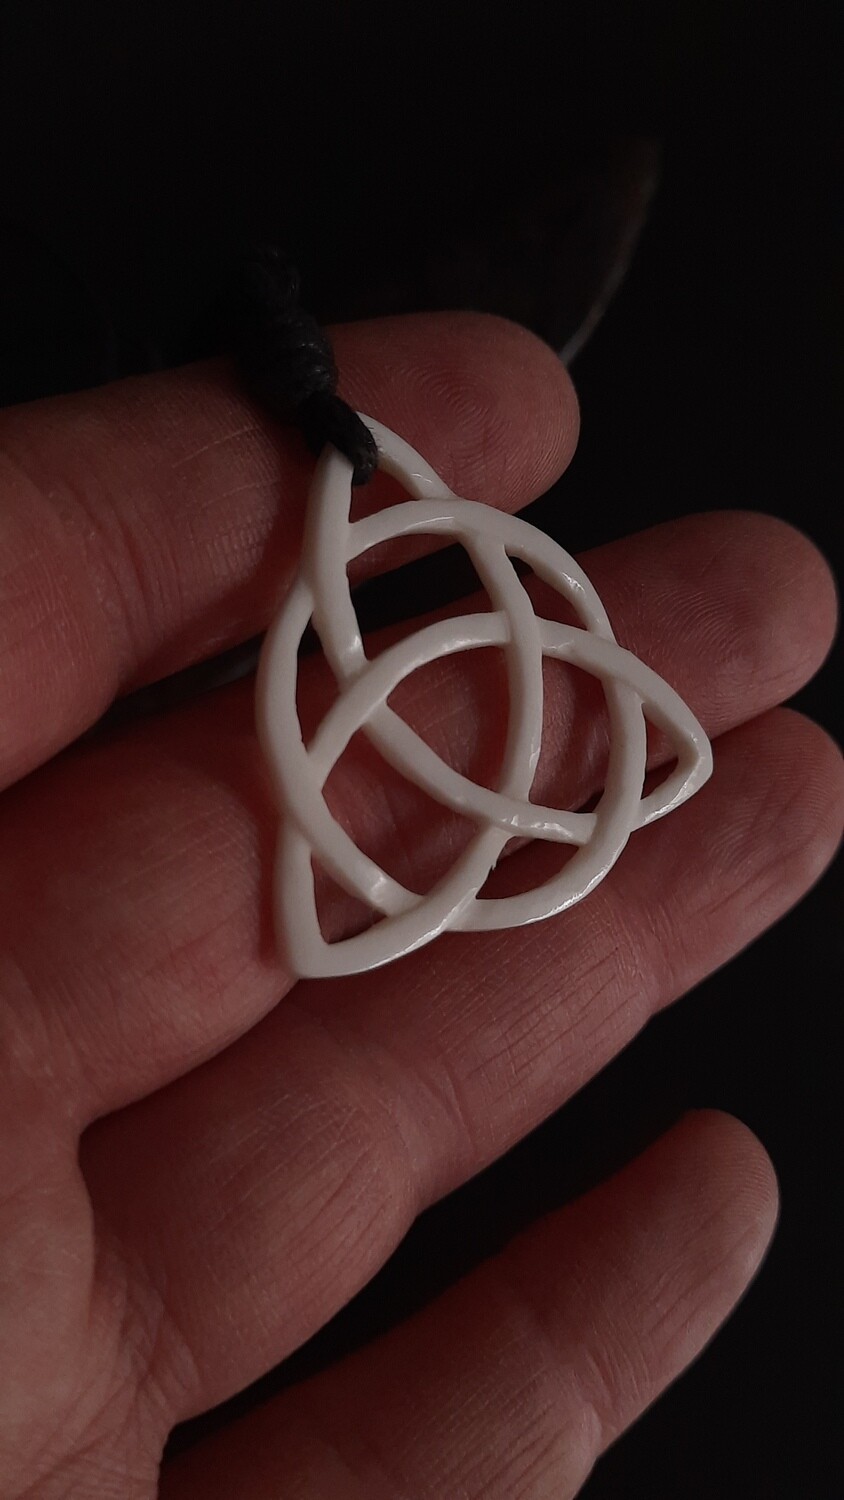 Celtic / Norse Triquetra pendant, hand-carving, handmade bone necklace, Historical Art Collection